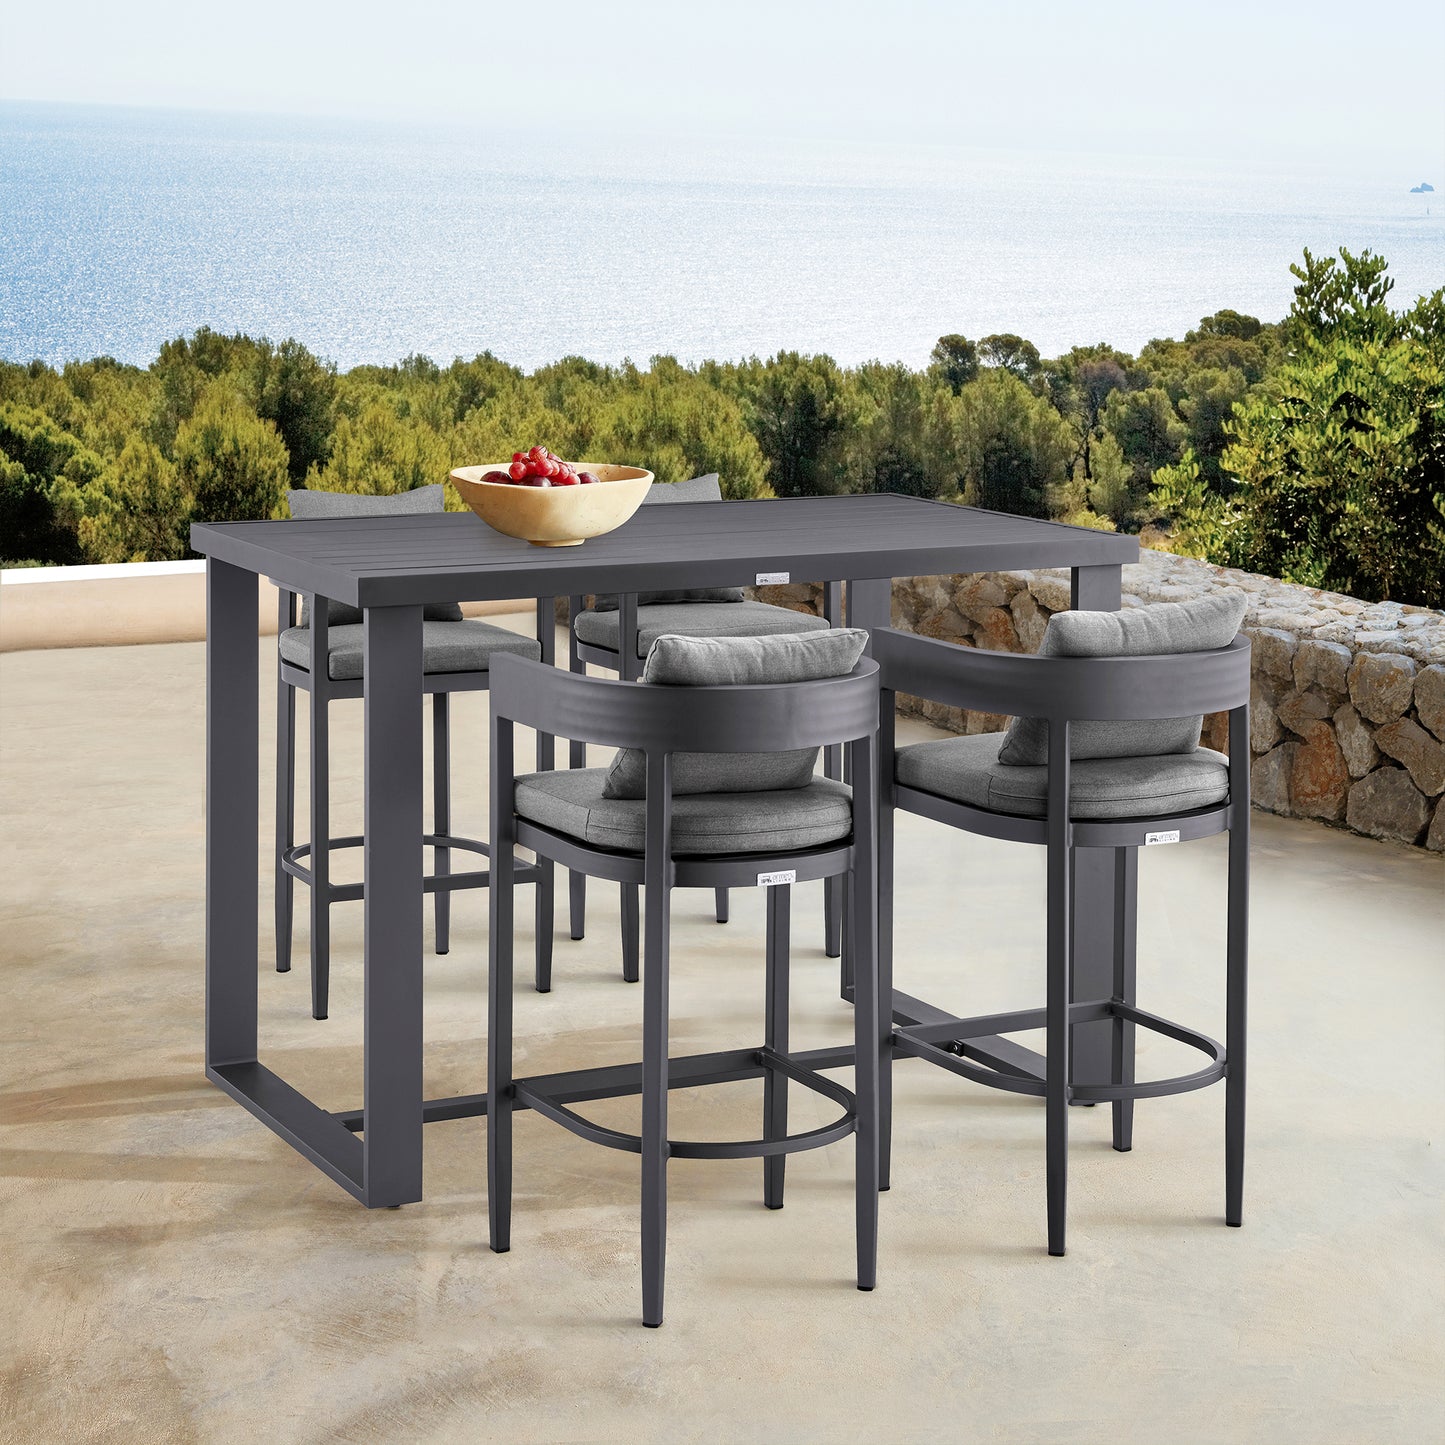 Argiope Outdoor Patio Bar Height Dining Table in Aluminum